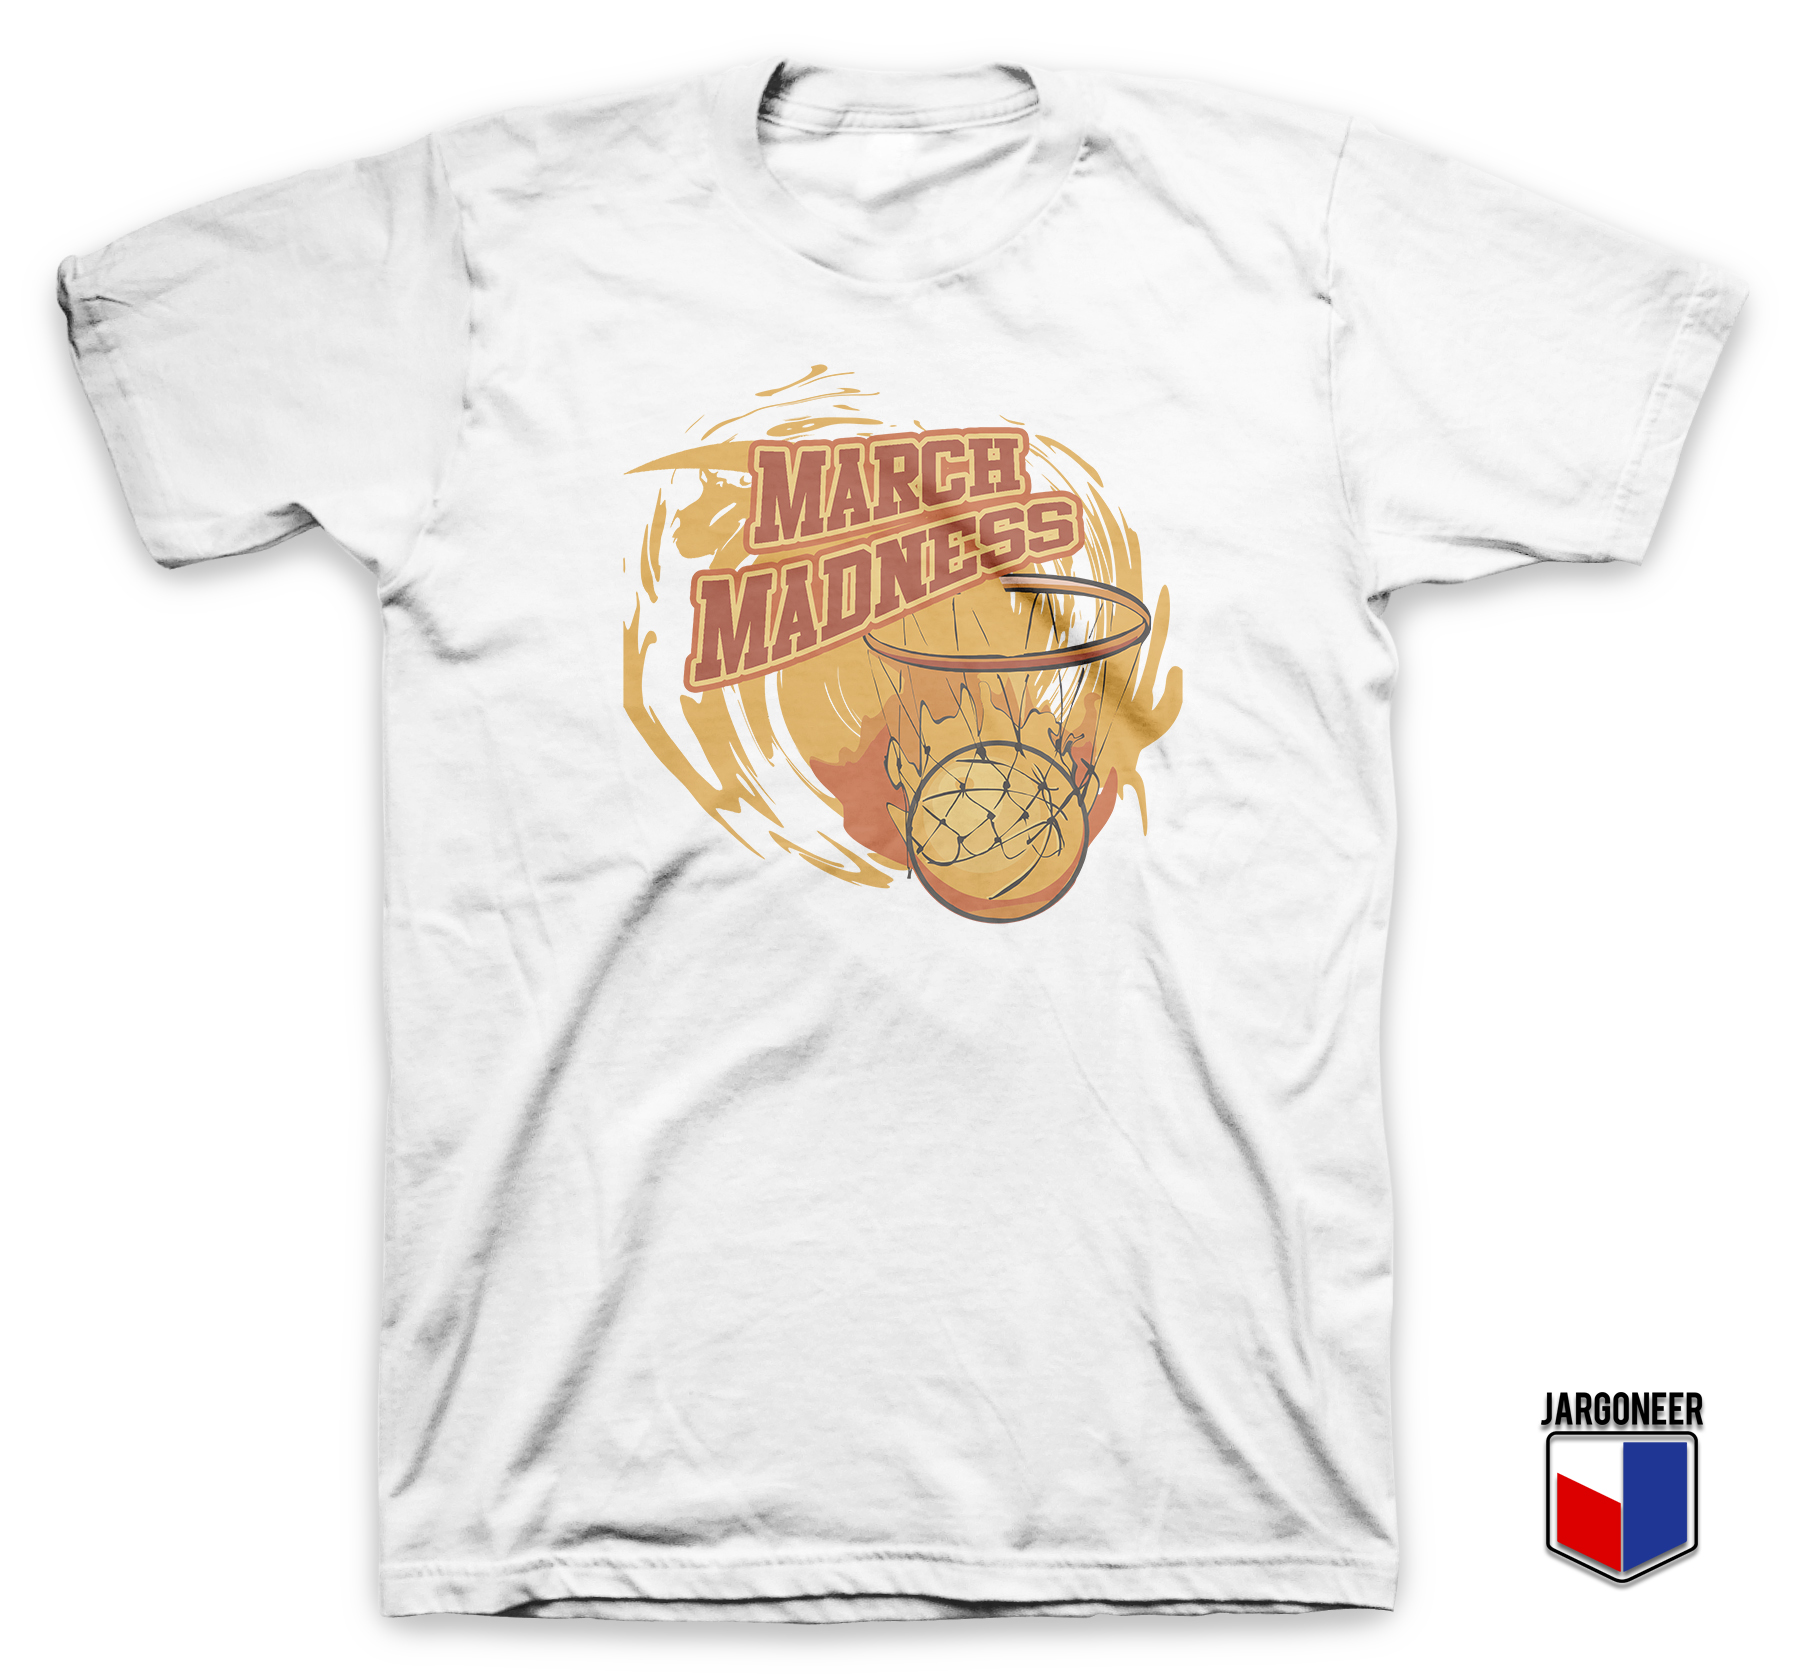 March Madness Basketball - Shop Unique Graphic Cool Shirt Designs